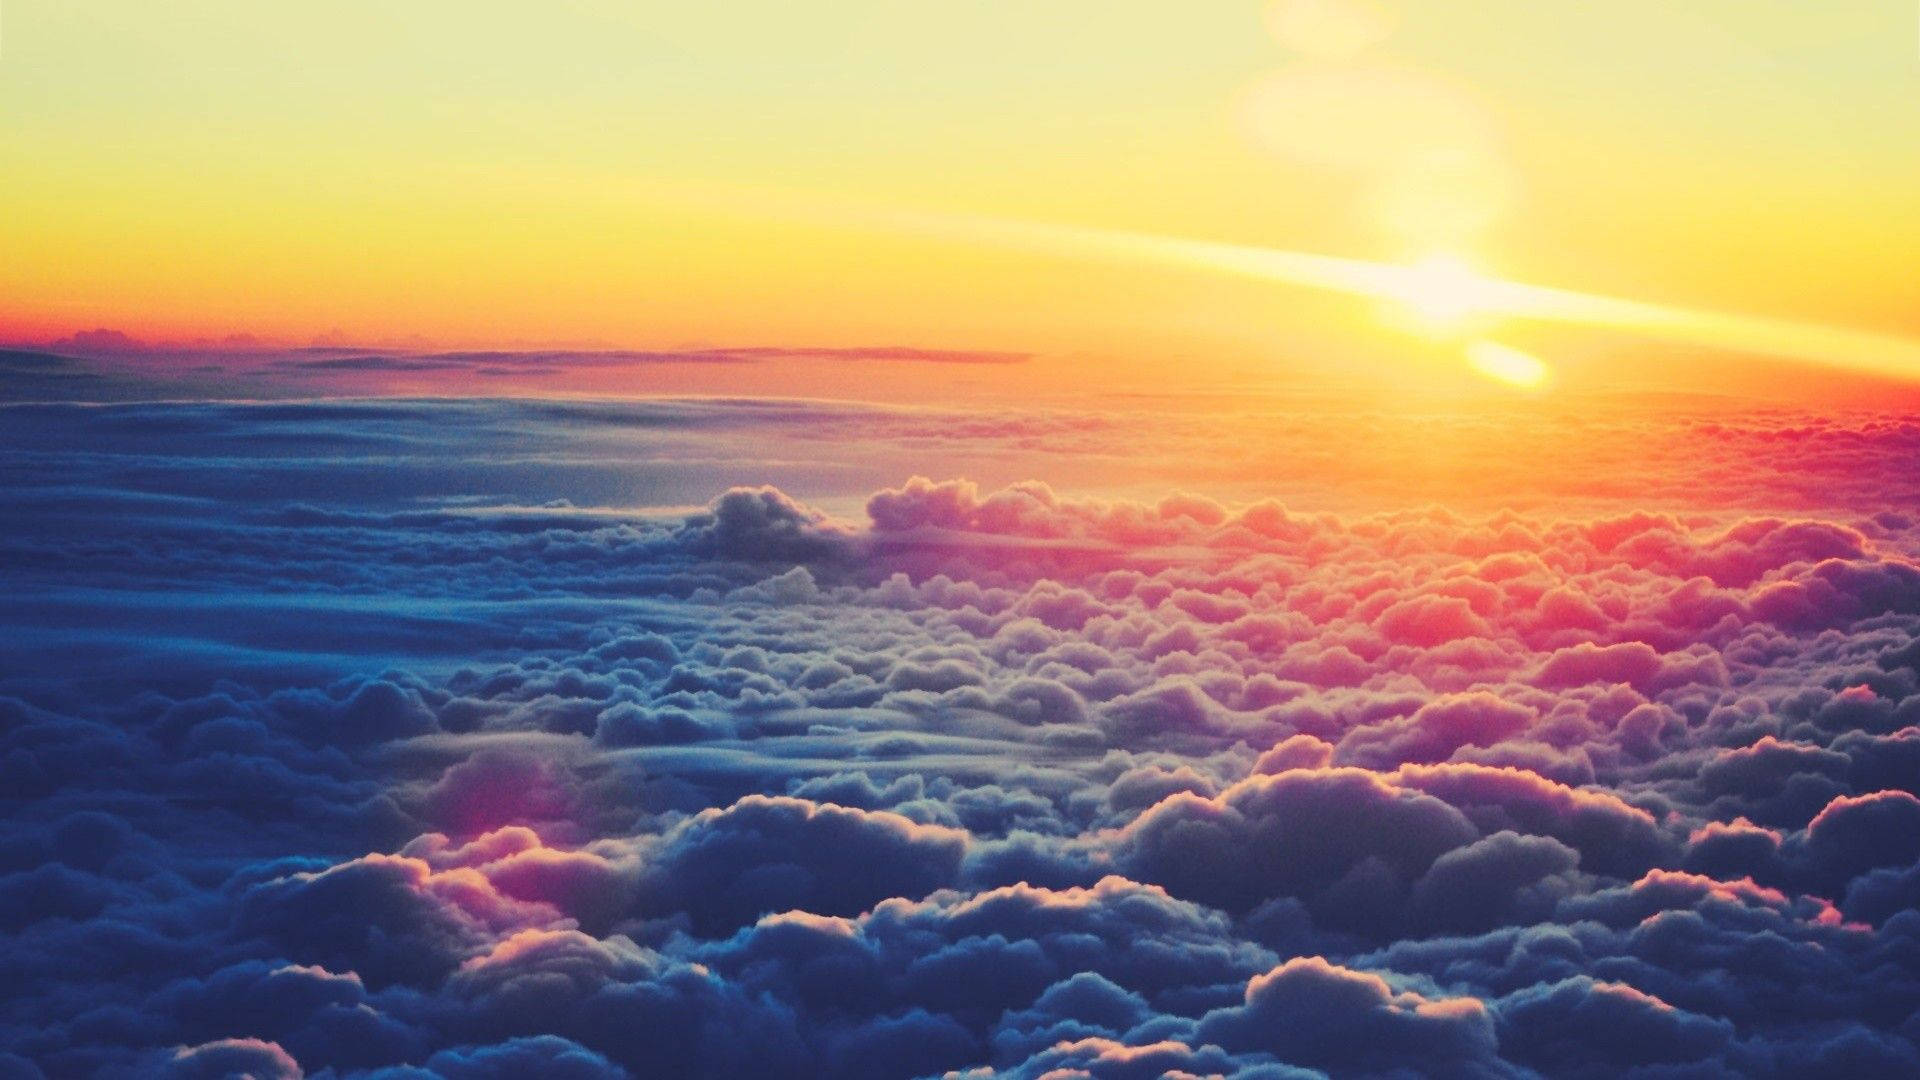 Free Clouds Wallpaper Downloads, [1600+] Clouds Wallpapers for FREE |  